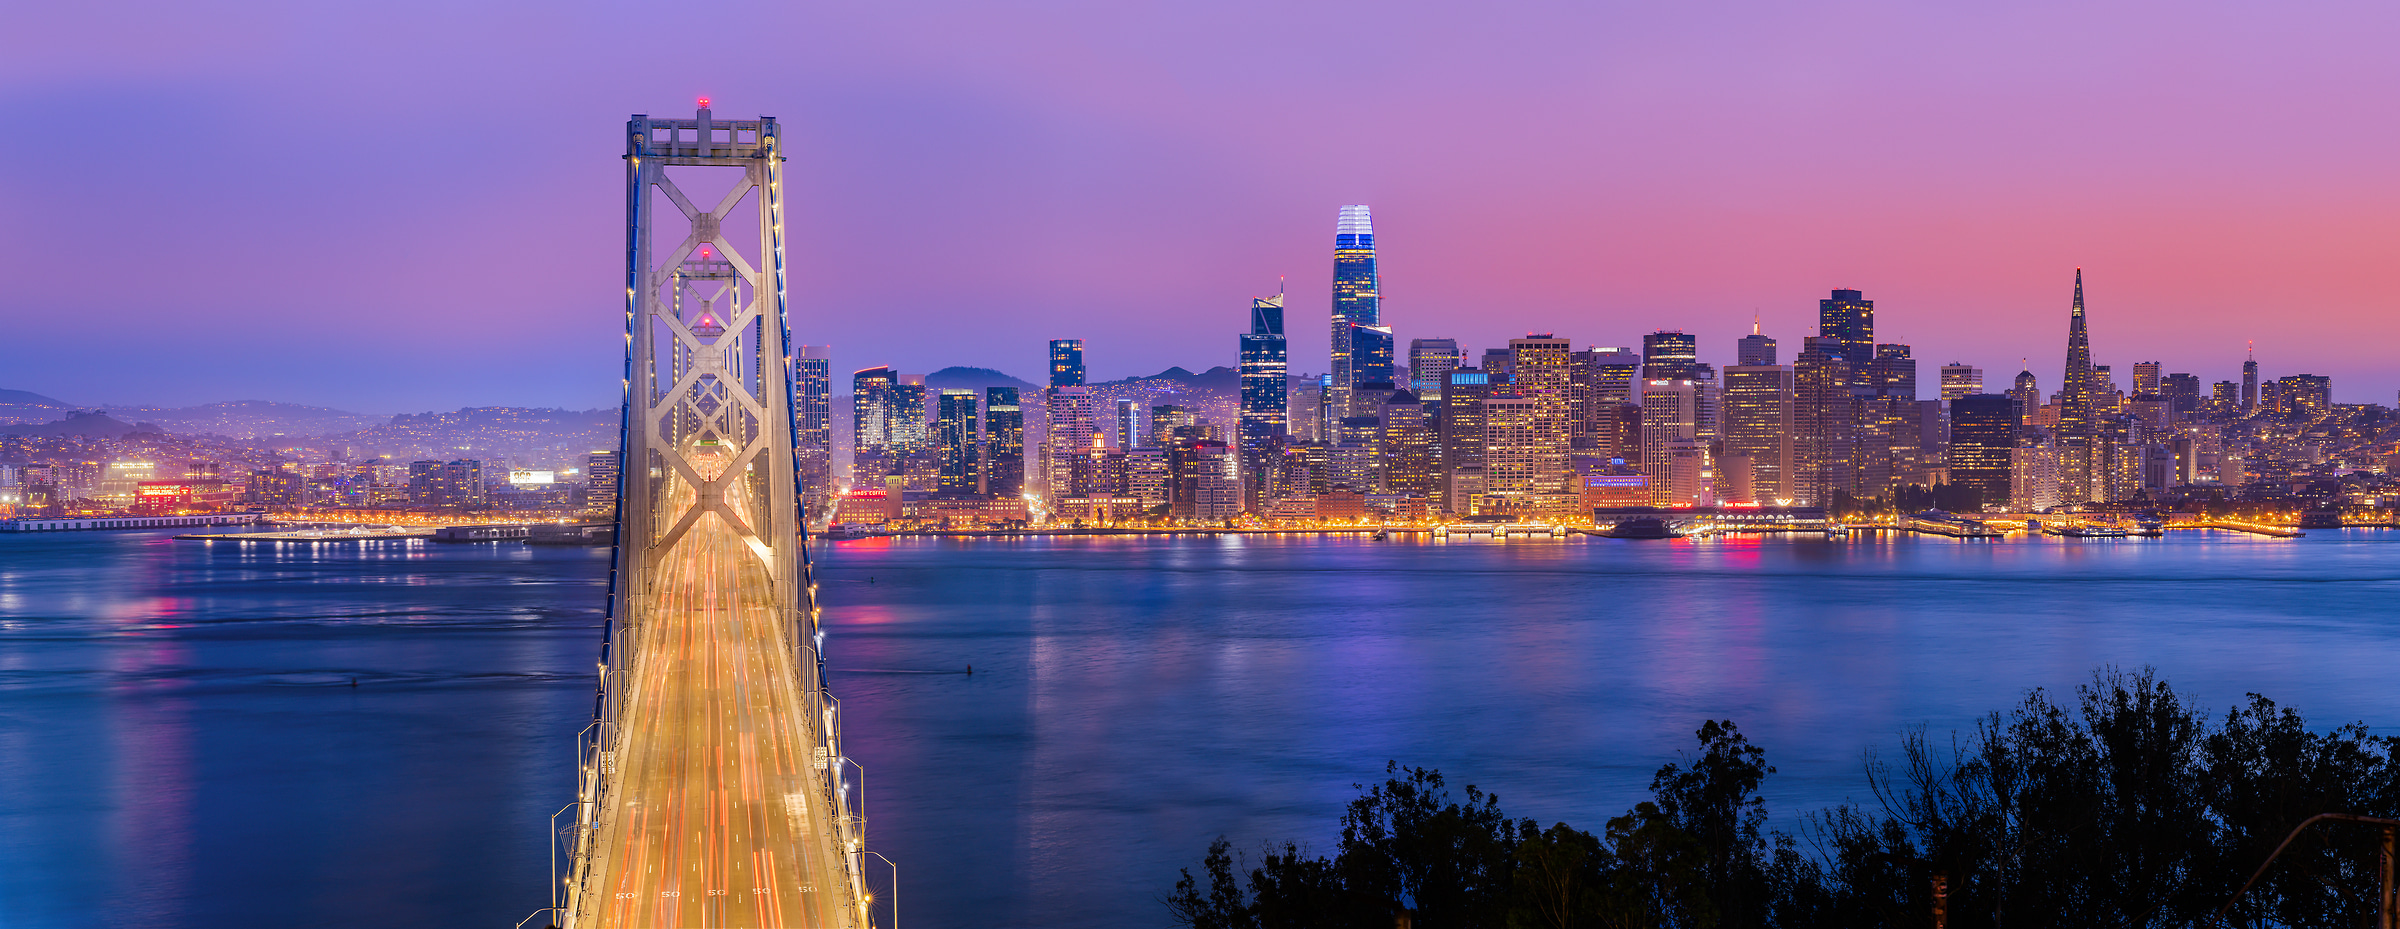 262 megapixels! A very high resolution, large-format VAST photo print of the San Francisco skyline and the San Francisco Bay Bridge at sunset; cityscape photograph created by Chris Blake in Treasure Island, San Francisco.